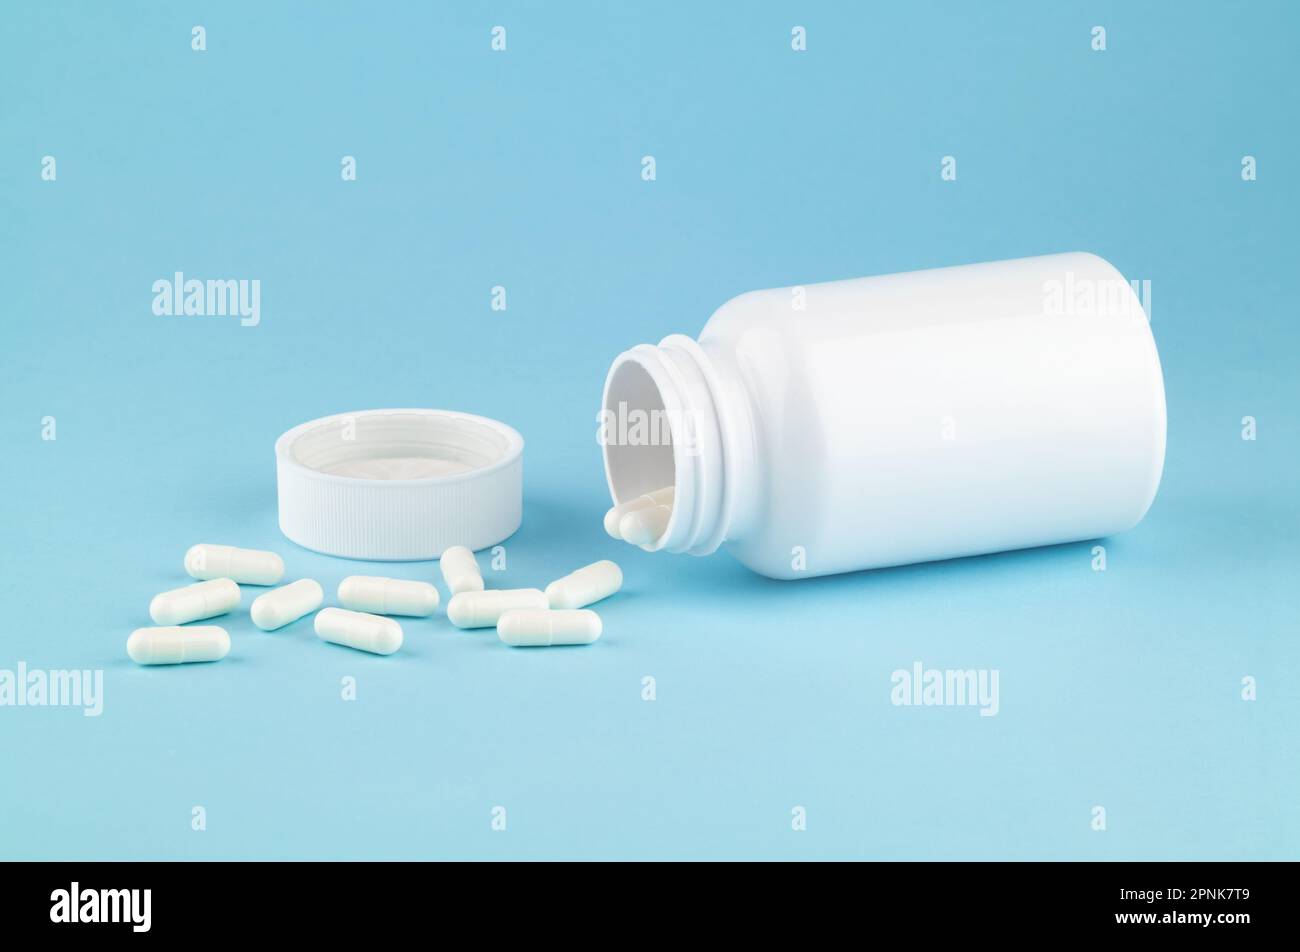 Different drugs and health supplement pills poured from a medicine white bottle health care and medical top view on colored blue background. Stock Photo